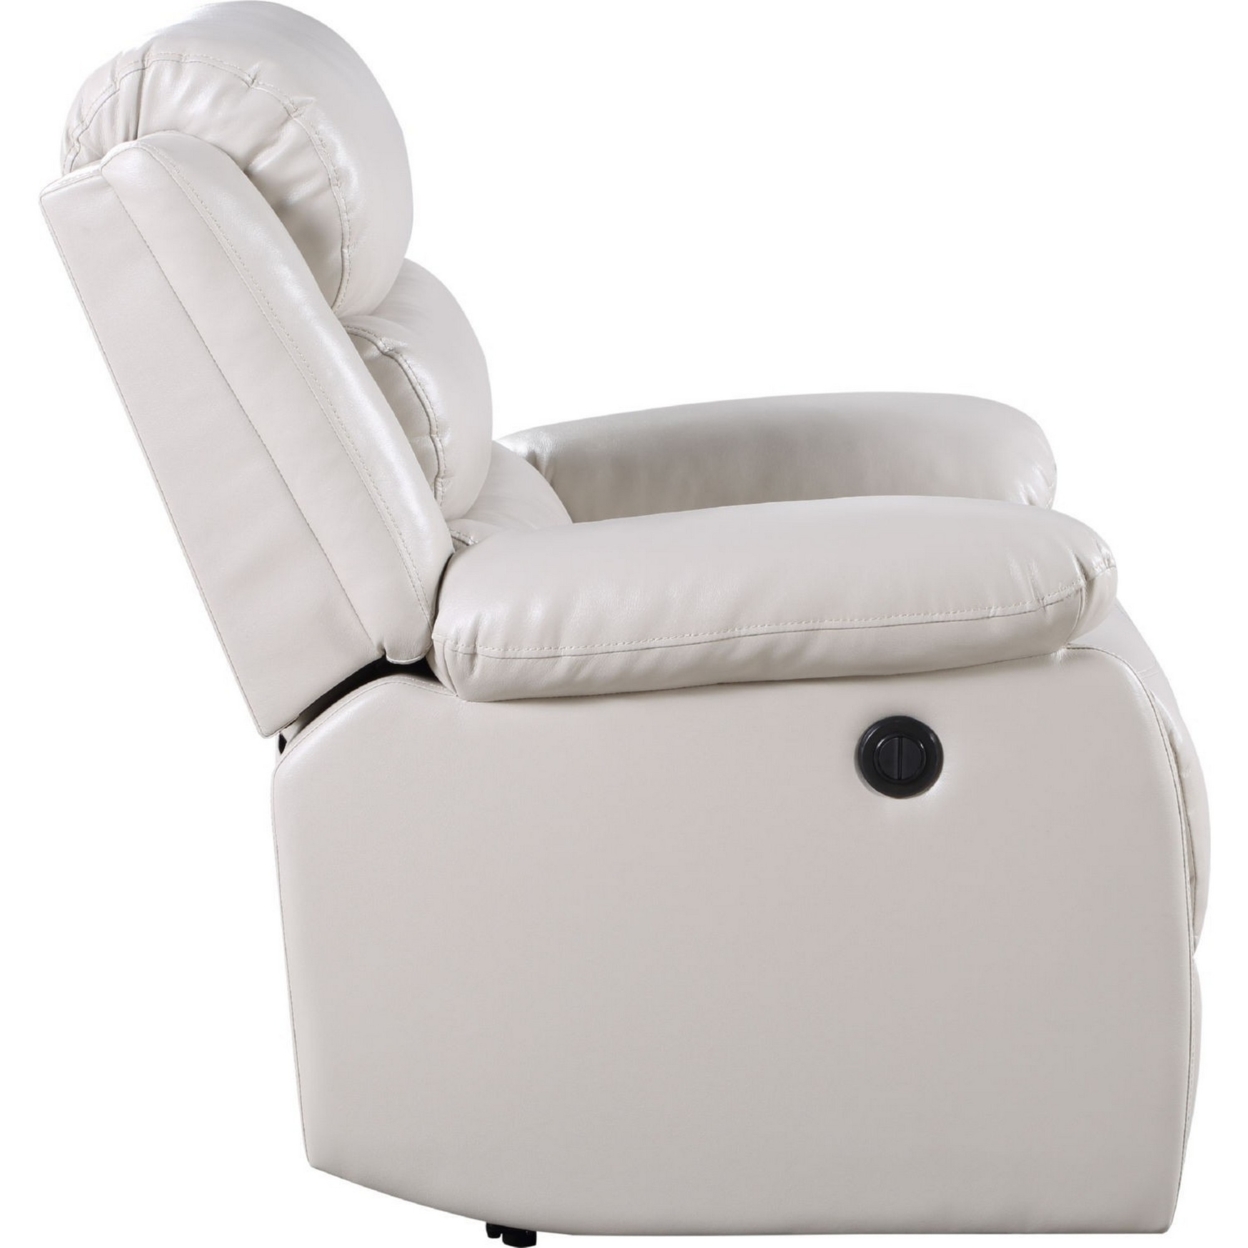 Power Recliner Chair With Split Back And Pillow Top, Cream- Saltoro Sherpi